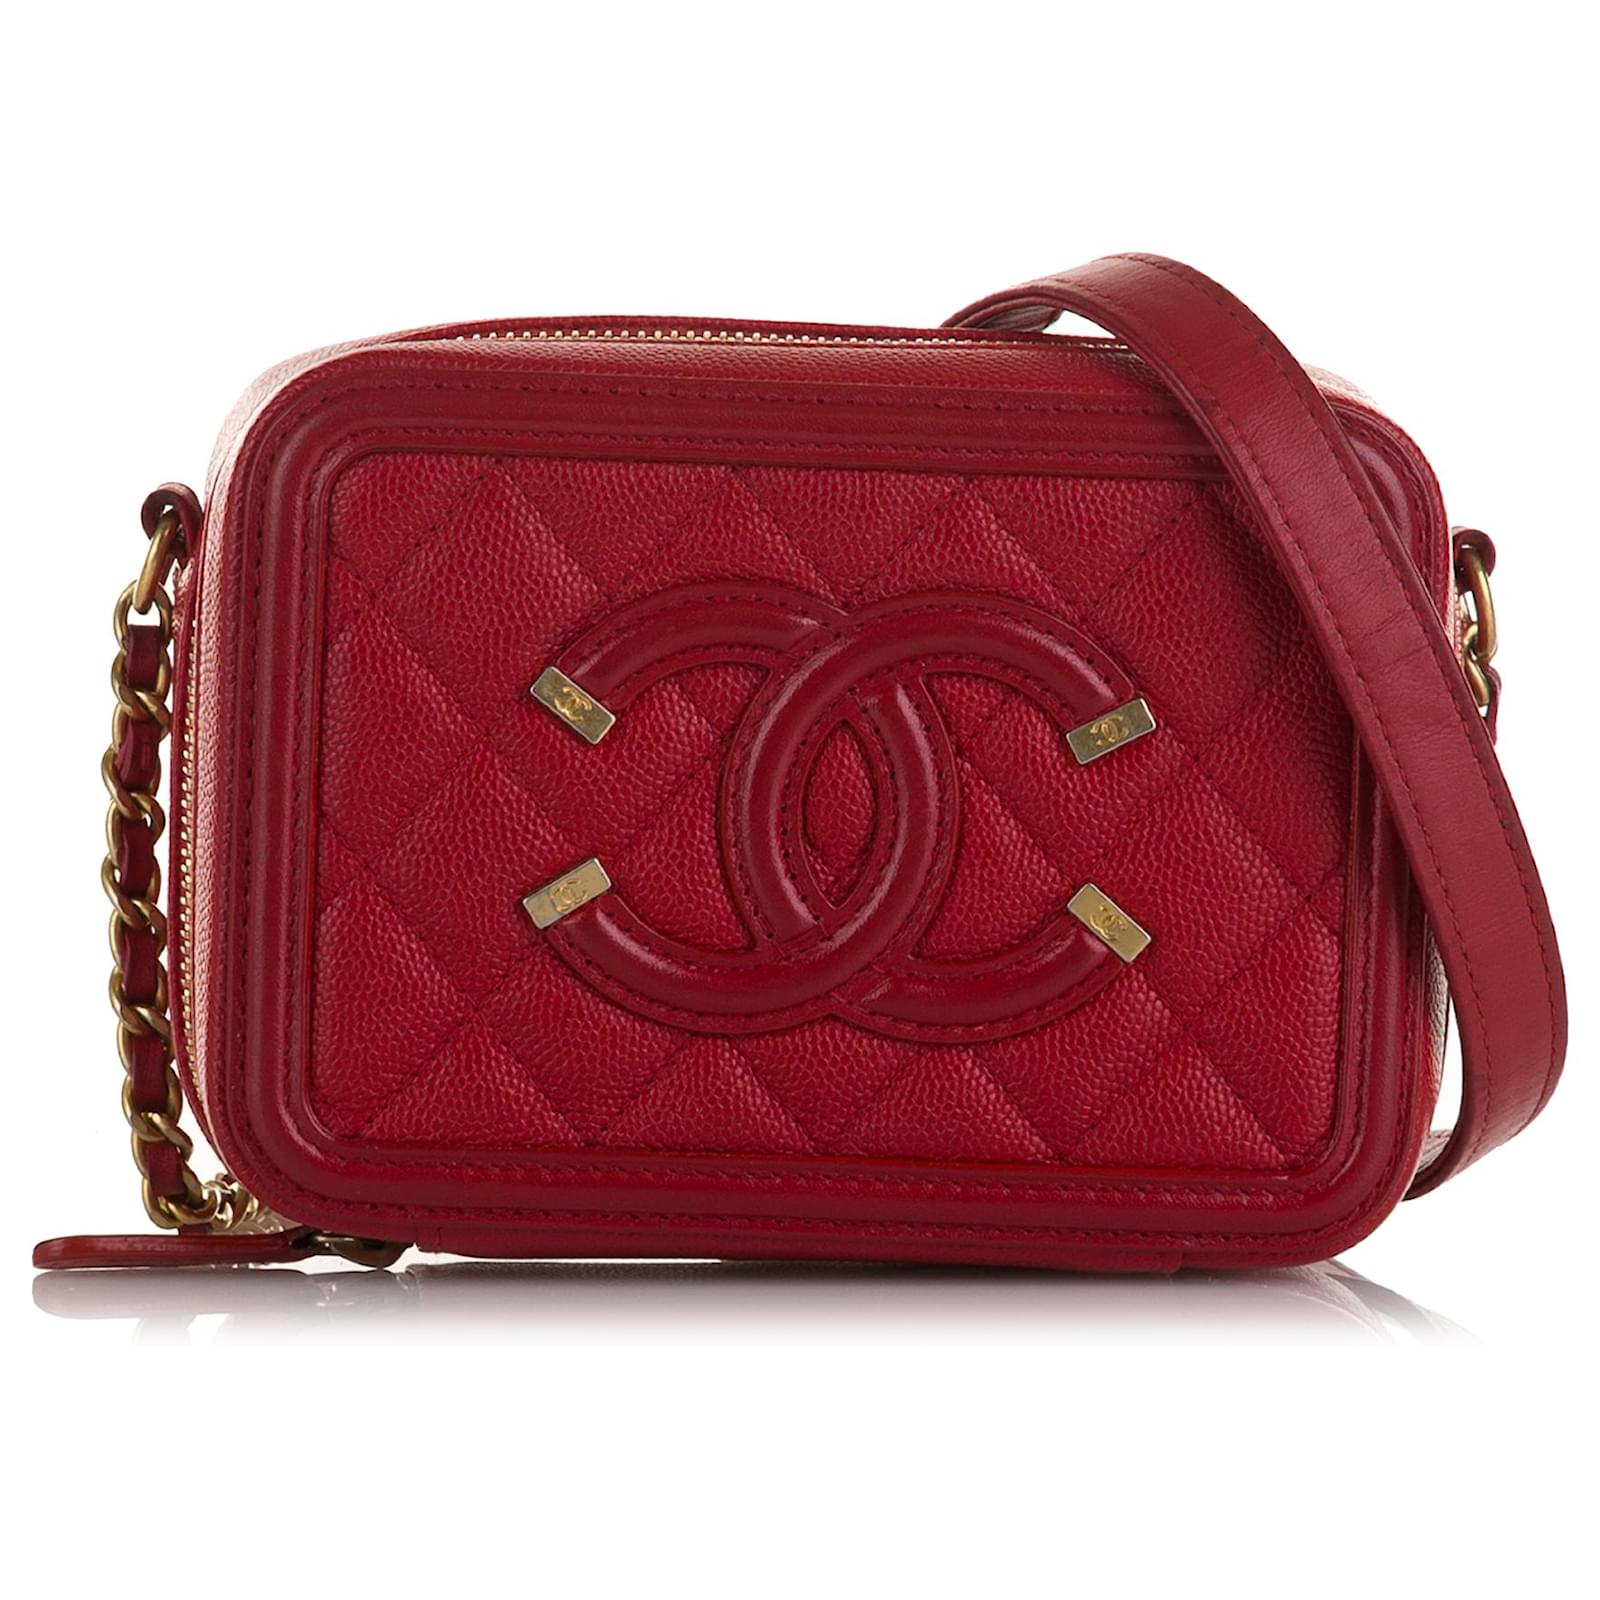 Chanel Red Quilted Caviar Leather Filigree Wallet Chanel